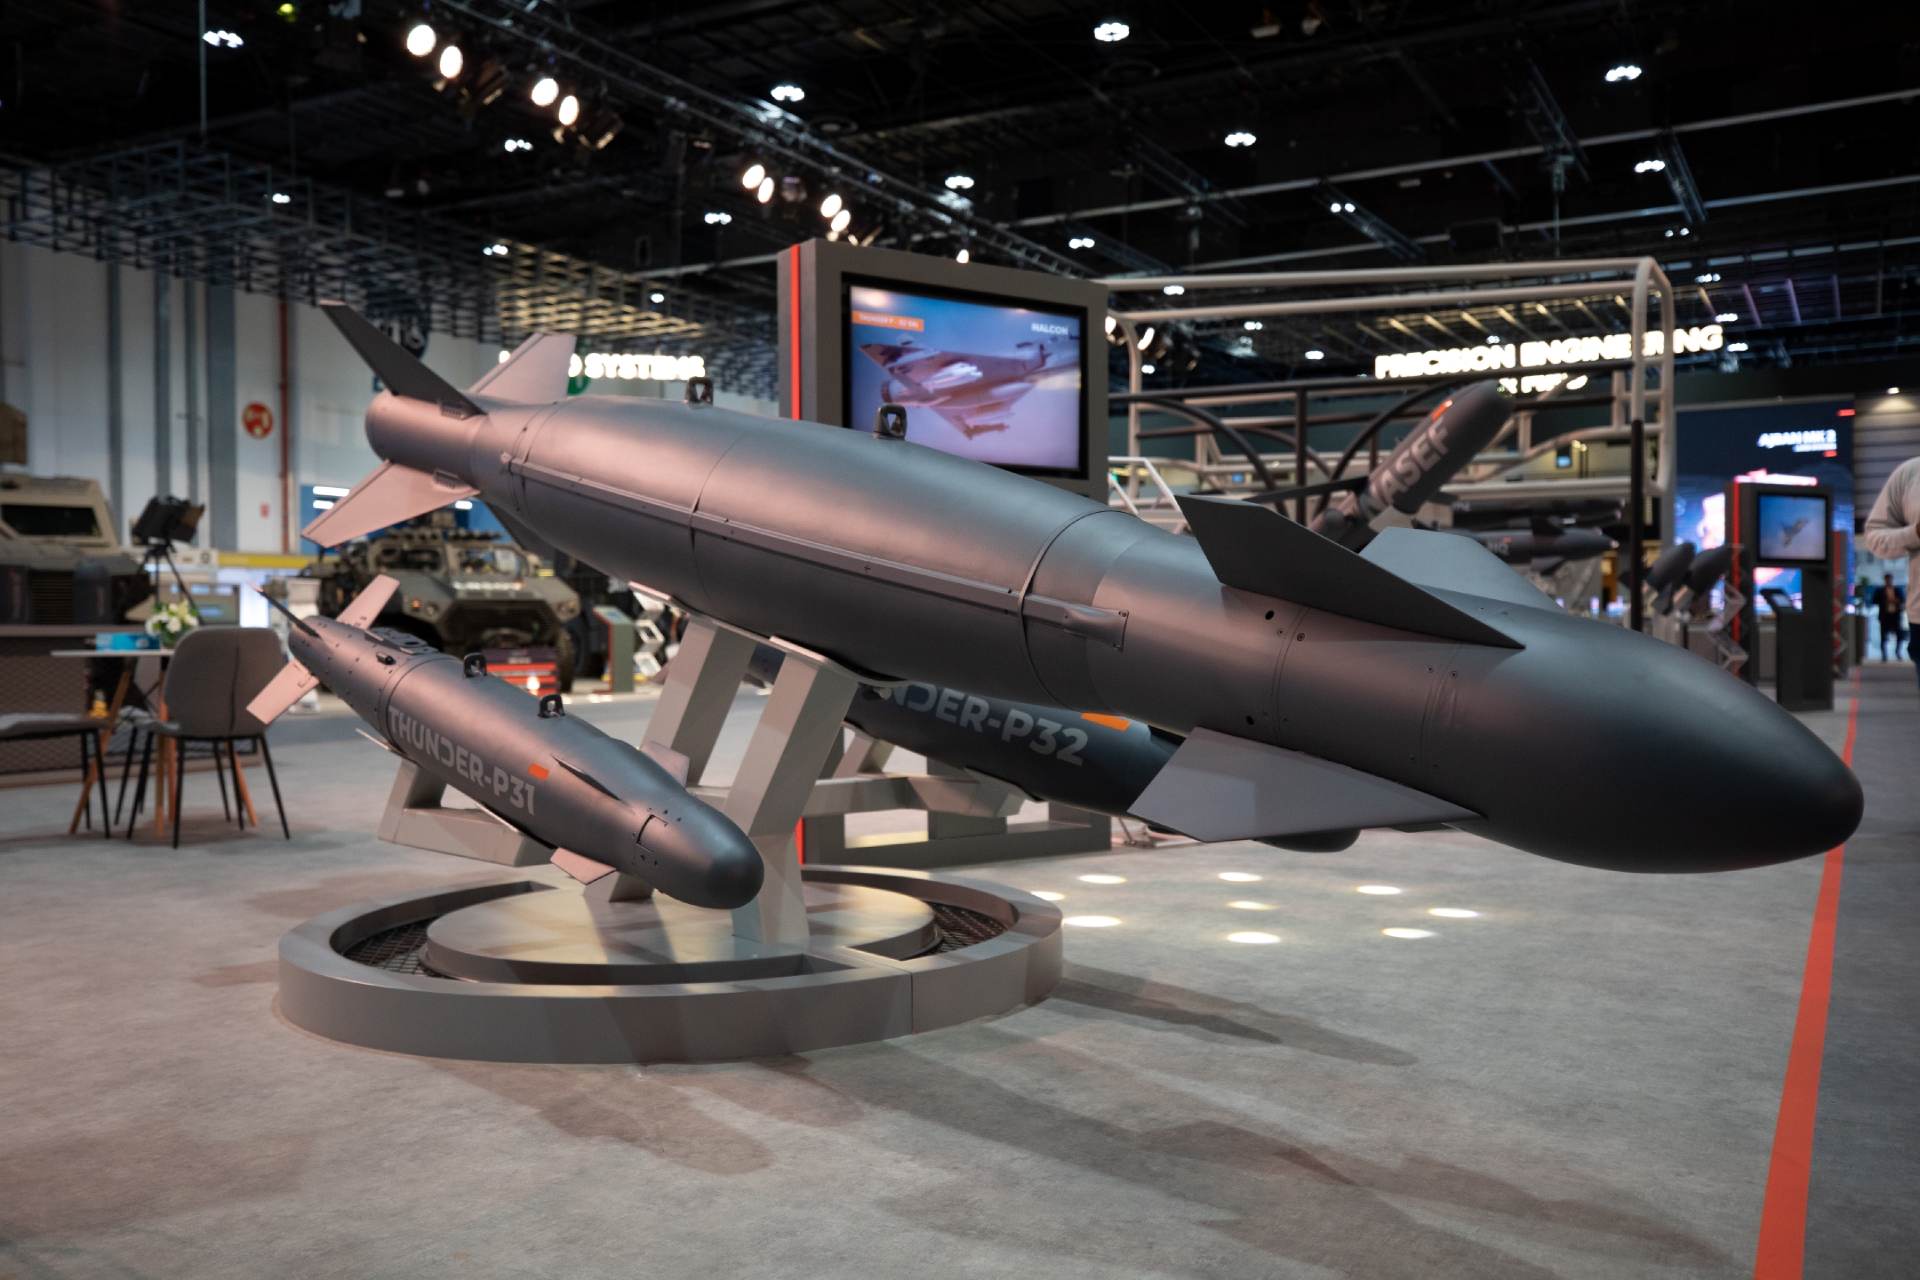 Edge received more than $2.5bn to supply drones and missiles to UAE Air Force